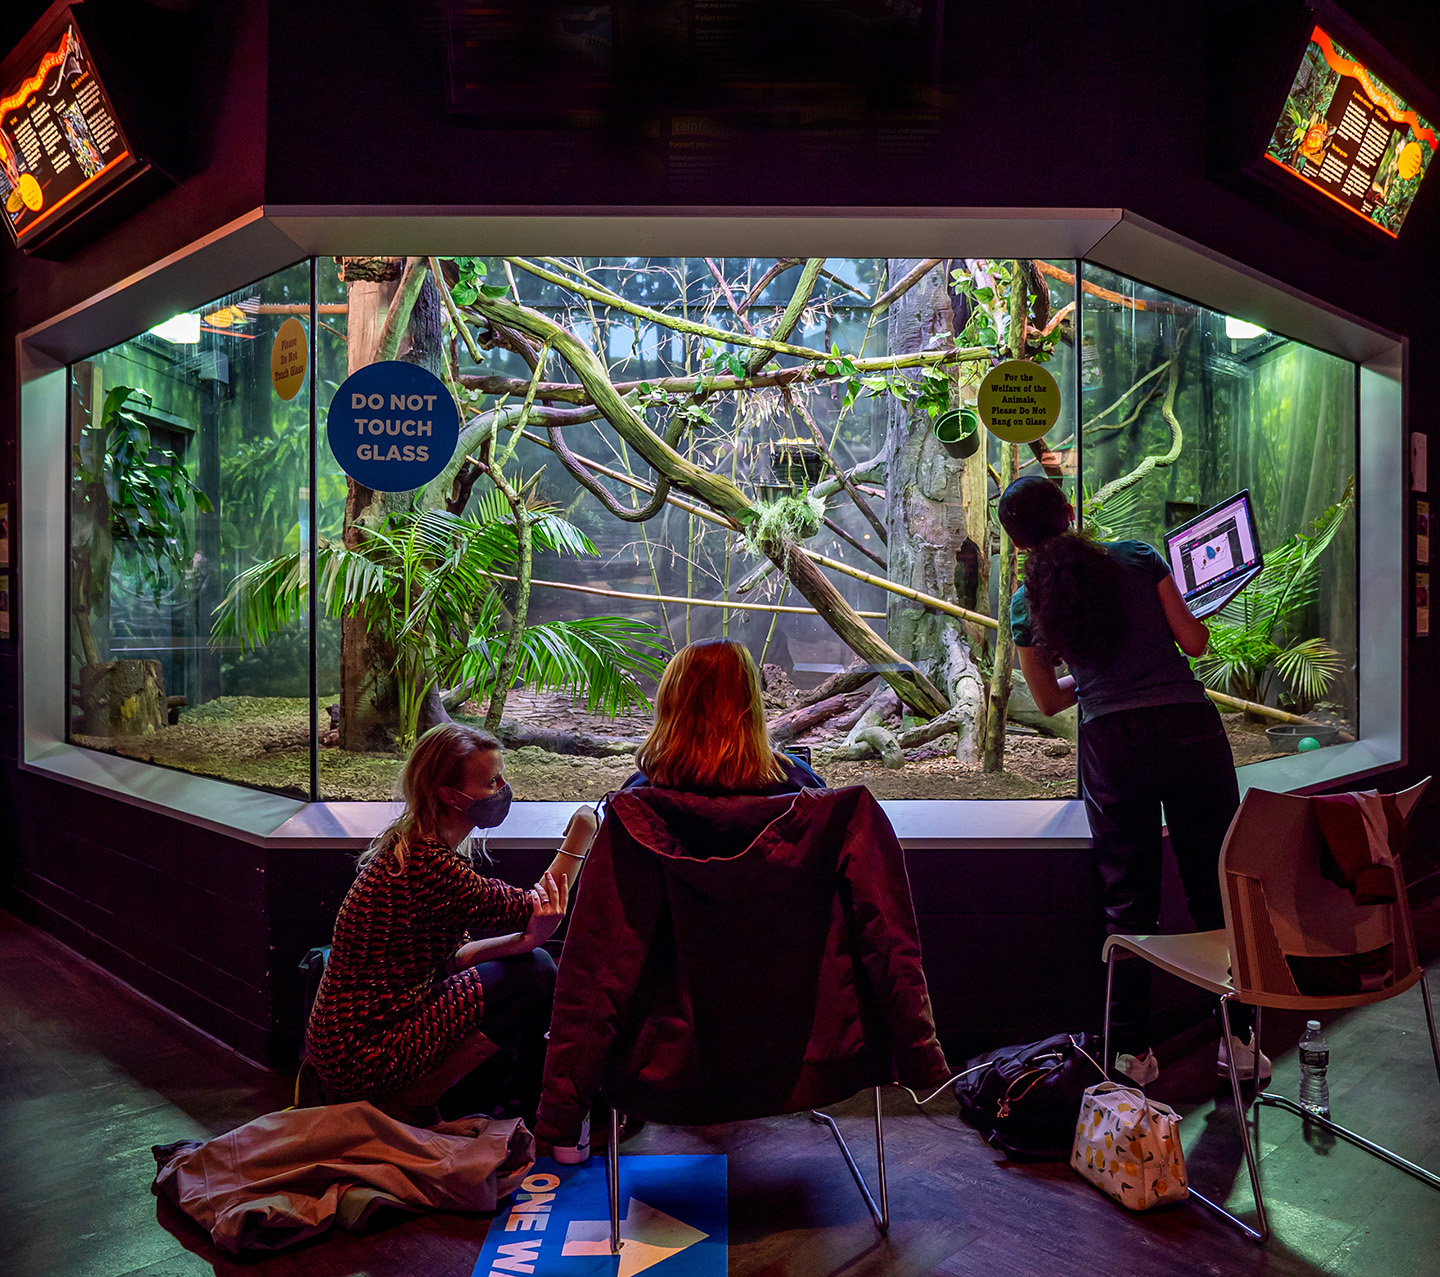 Students observing zoo exhibit behind glass